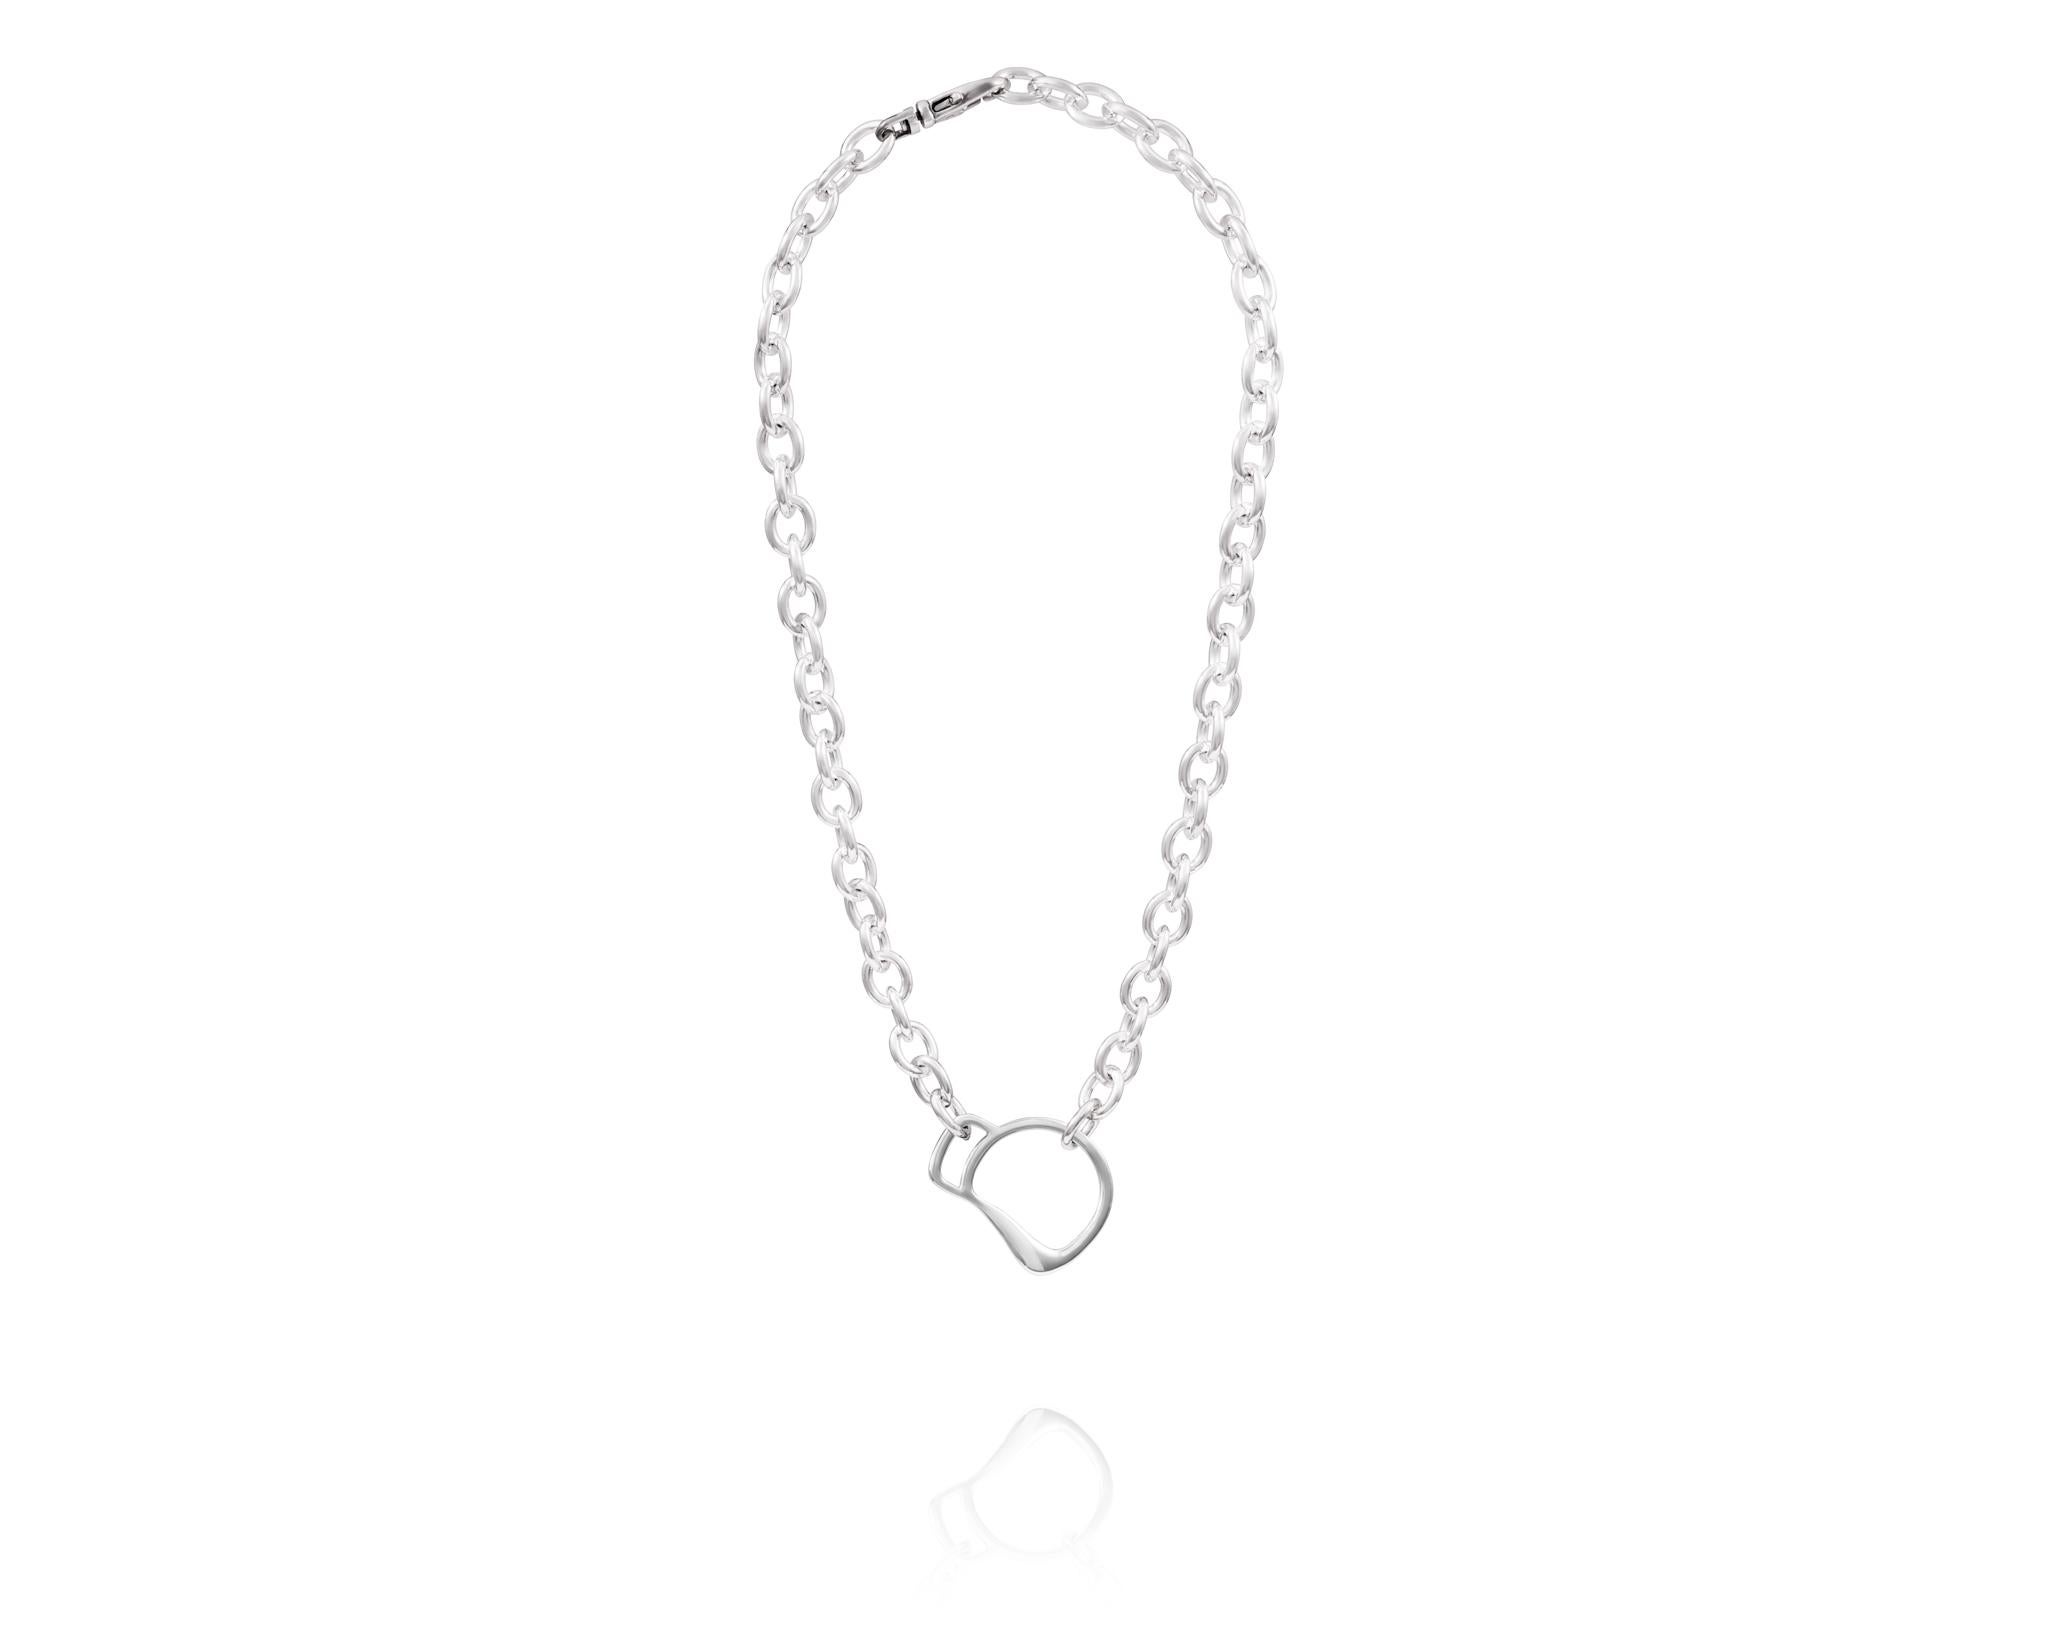 Part of the Vincent Peach Equestrian Collection, the Cheval Bit Chain Necklace has a Sterling Silver Bit Pendant on a Chunky, 17